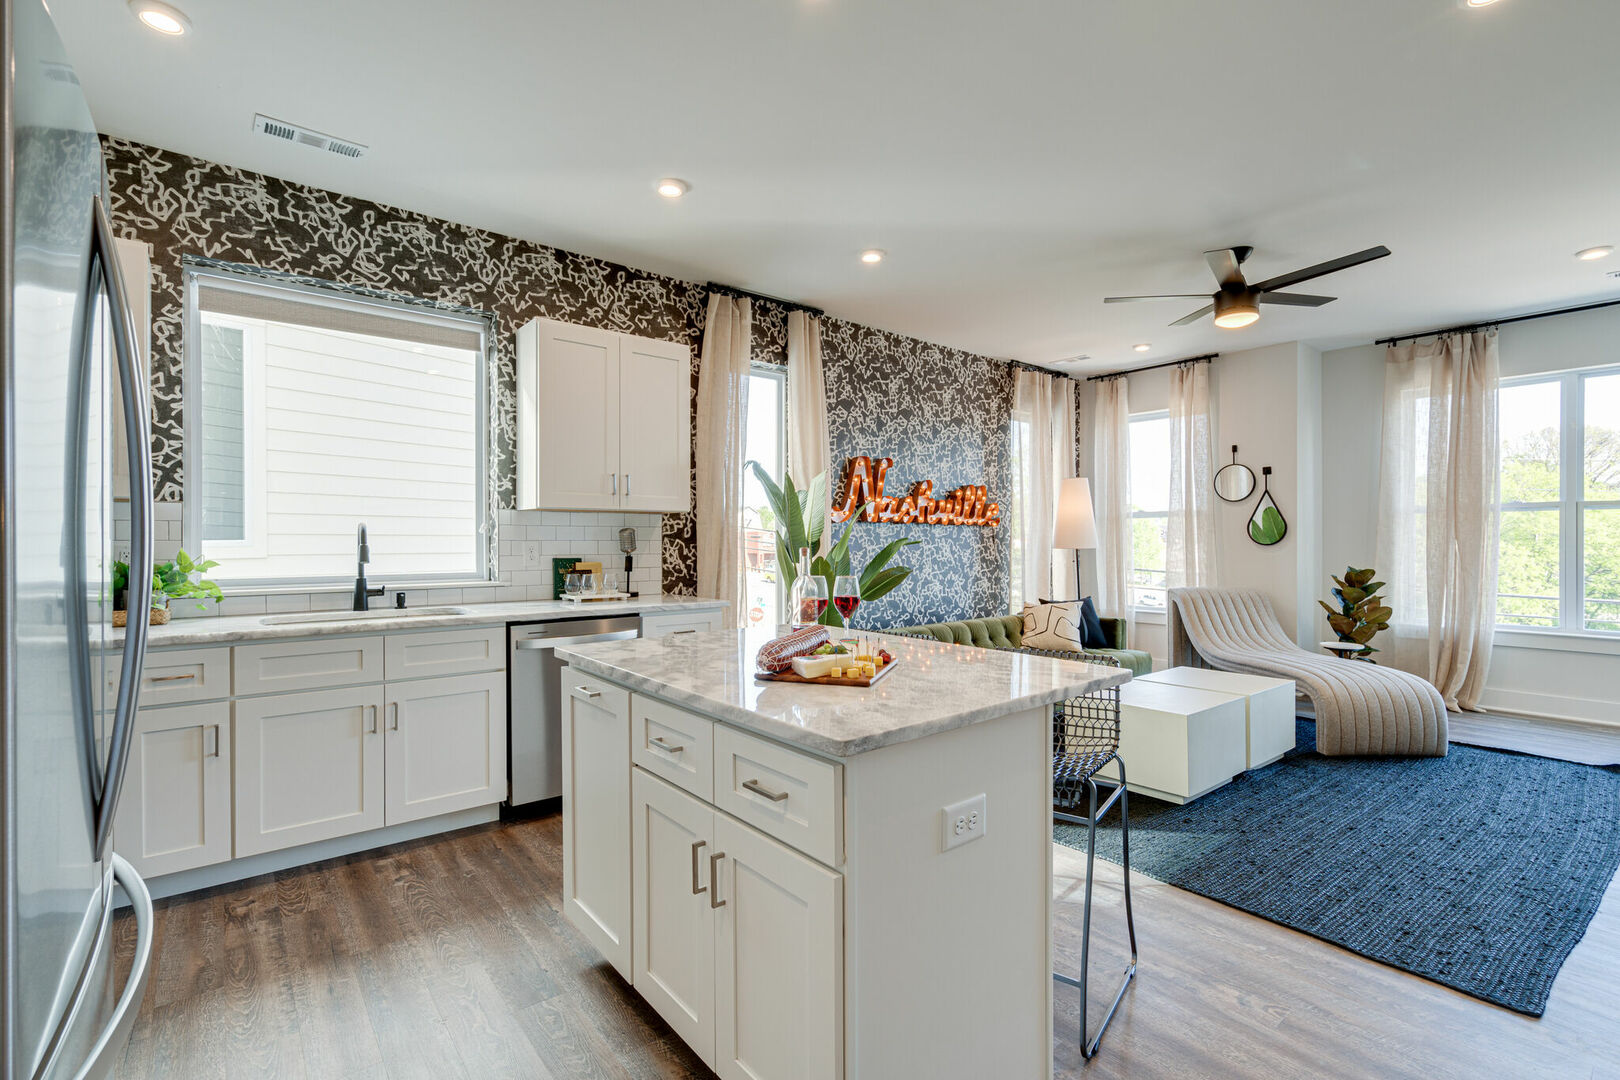 Open kitchen with stainless steel appliances, large island, breakfast bar seating, and is fully equipped with your basic cooking essentials.